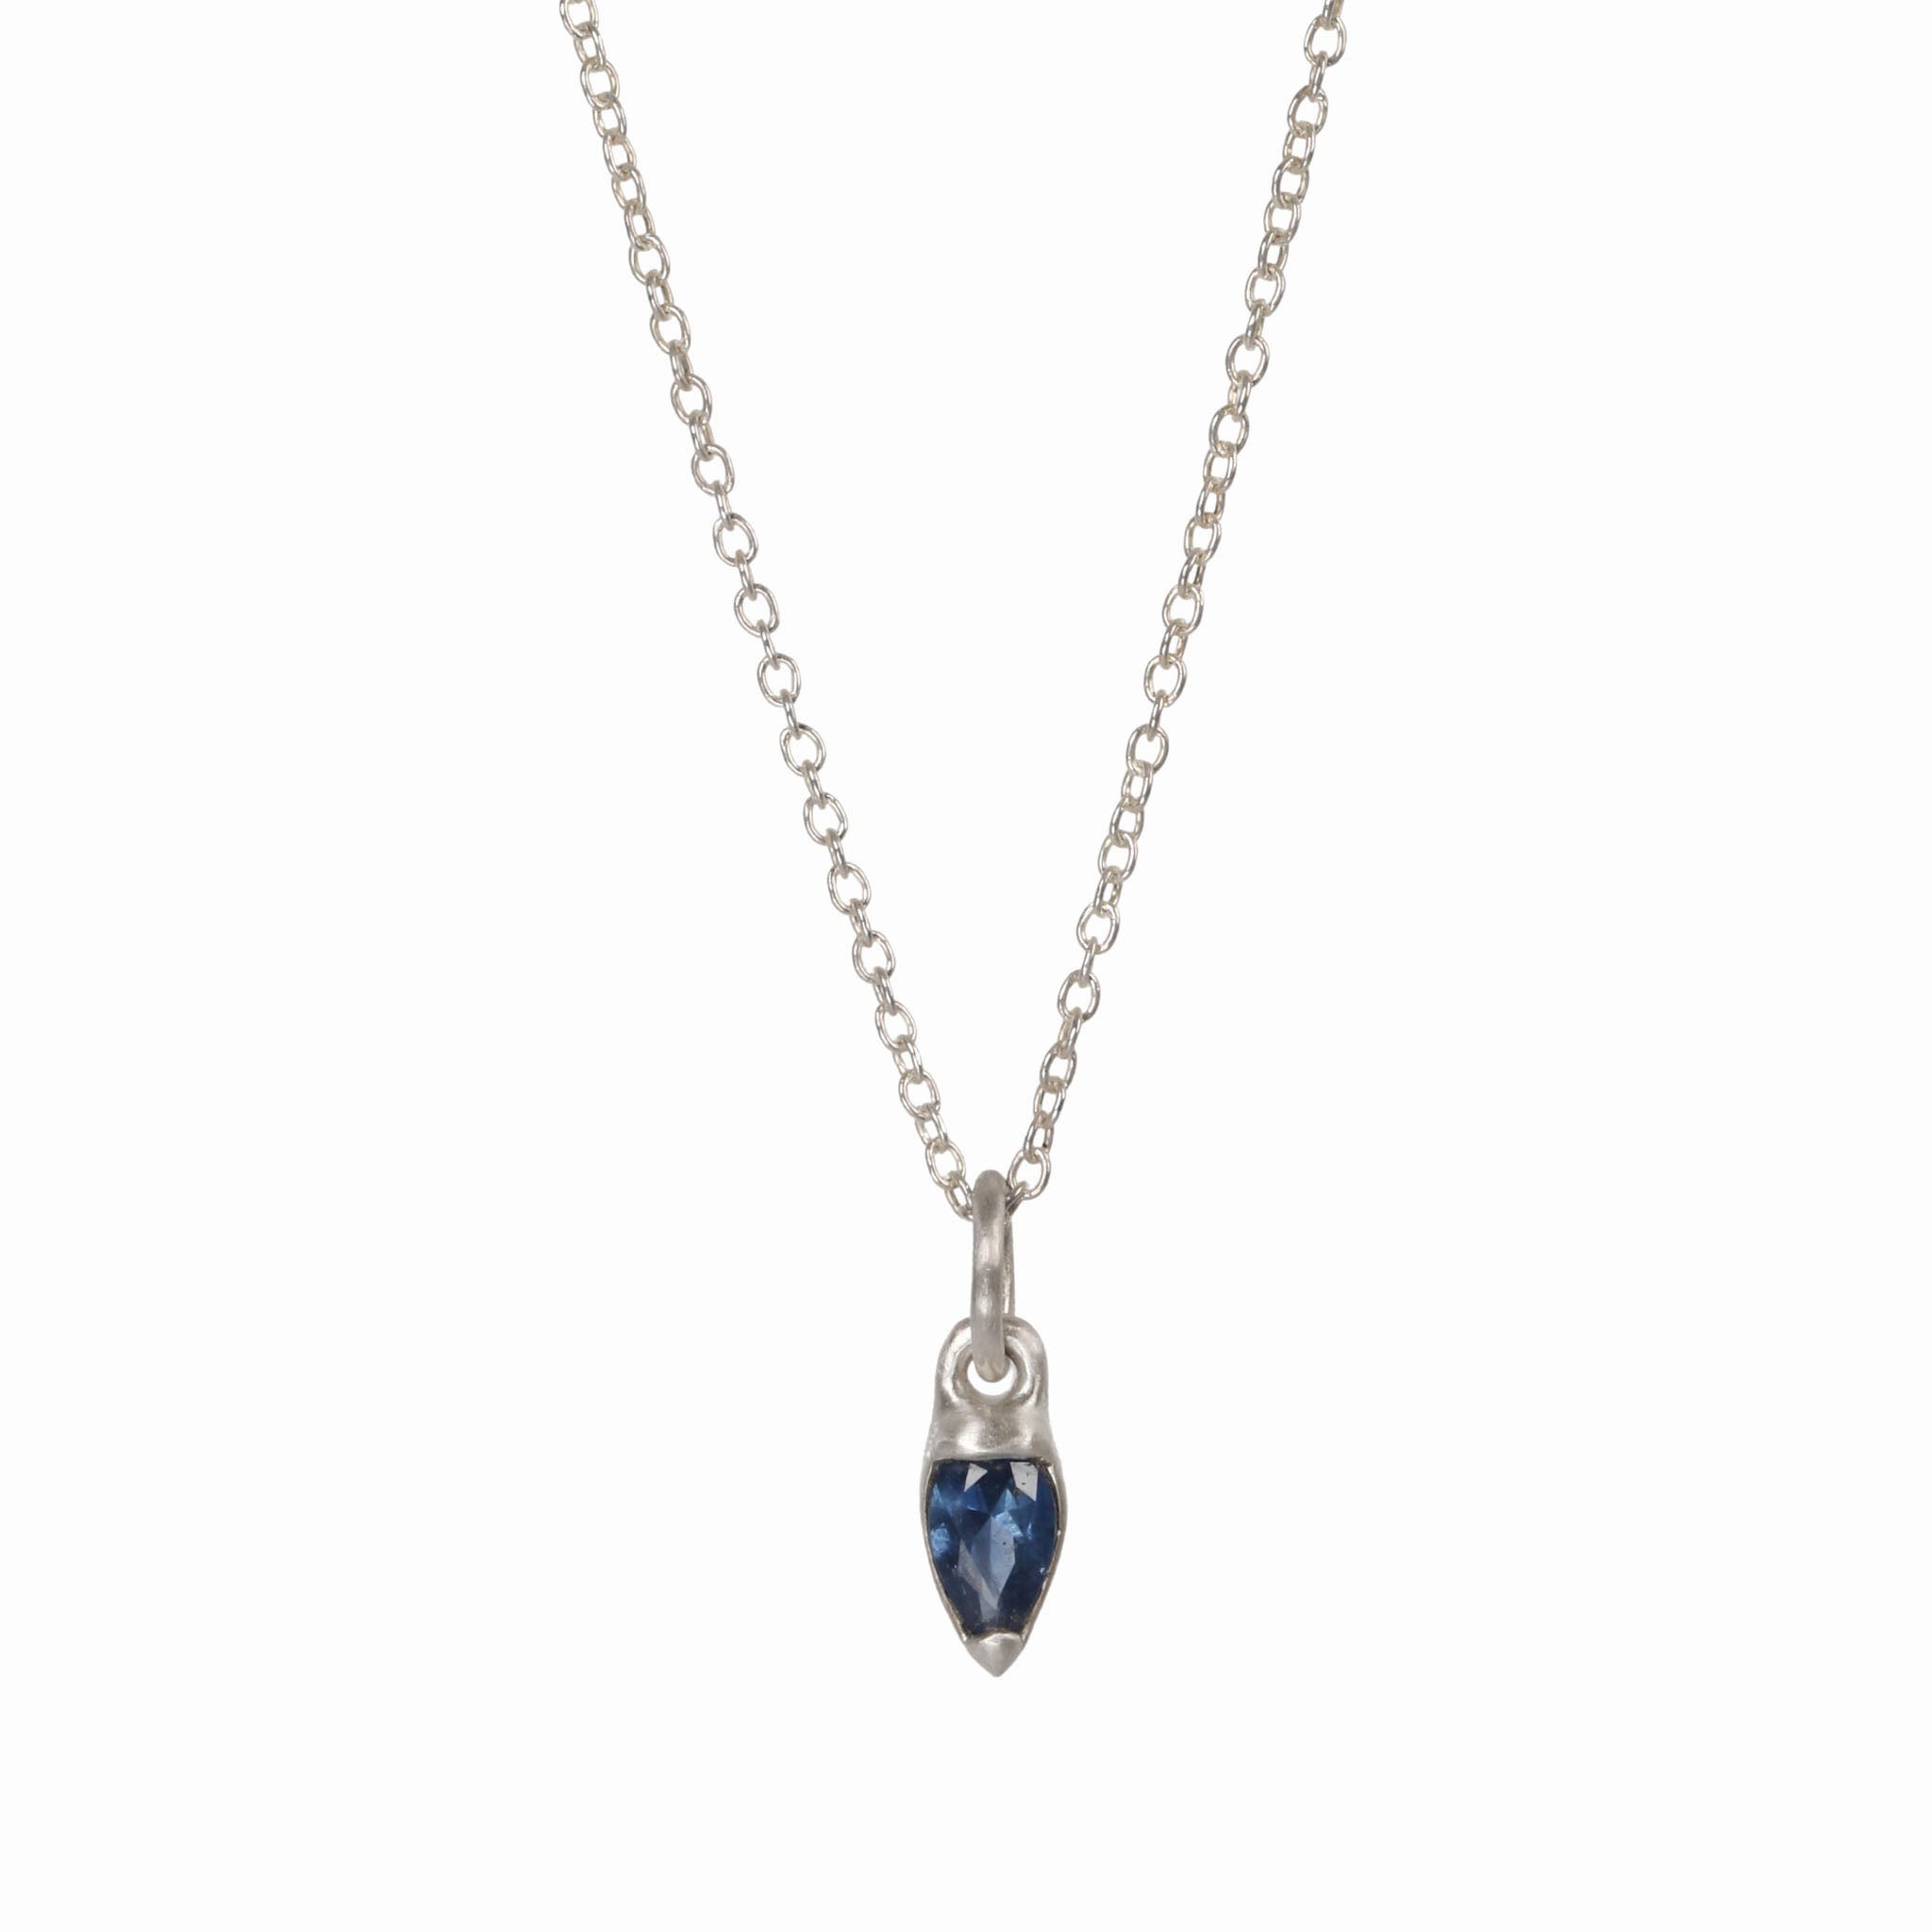 Sterling Silver and Pear-Shaped Blue Sapphire Pendant Necklace.